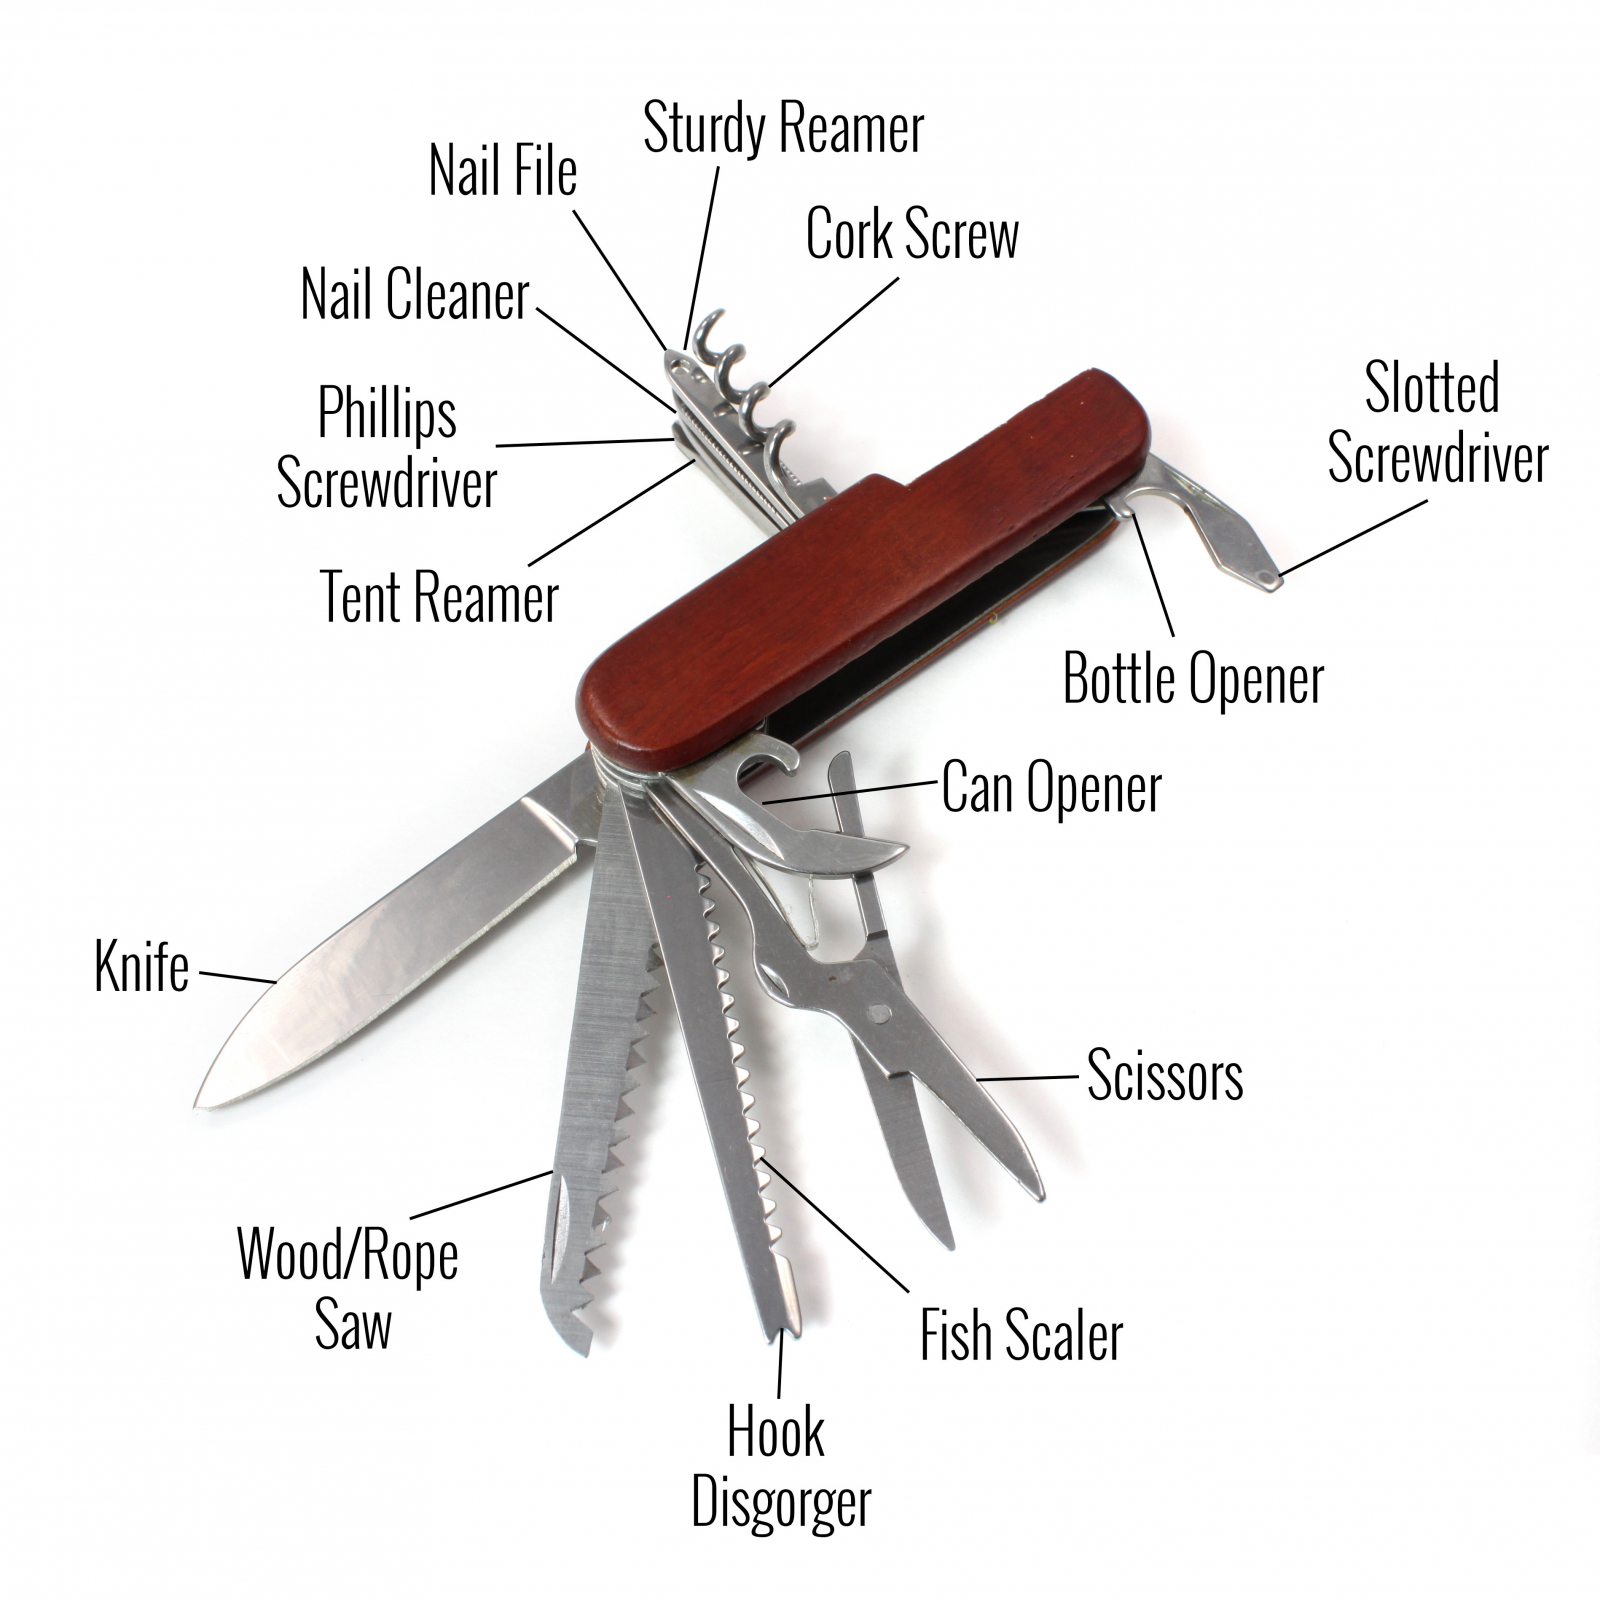 ASR Outdoor 3.5 Inch Compact 14 in 1 Folding Pocket Utility Knife Multi Tool with Wood Body - image 4 of 7